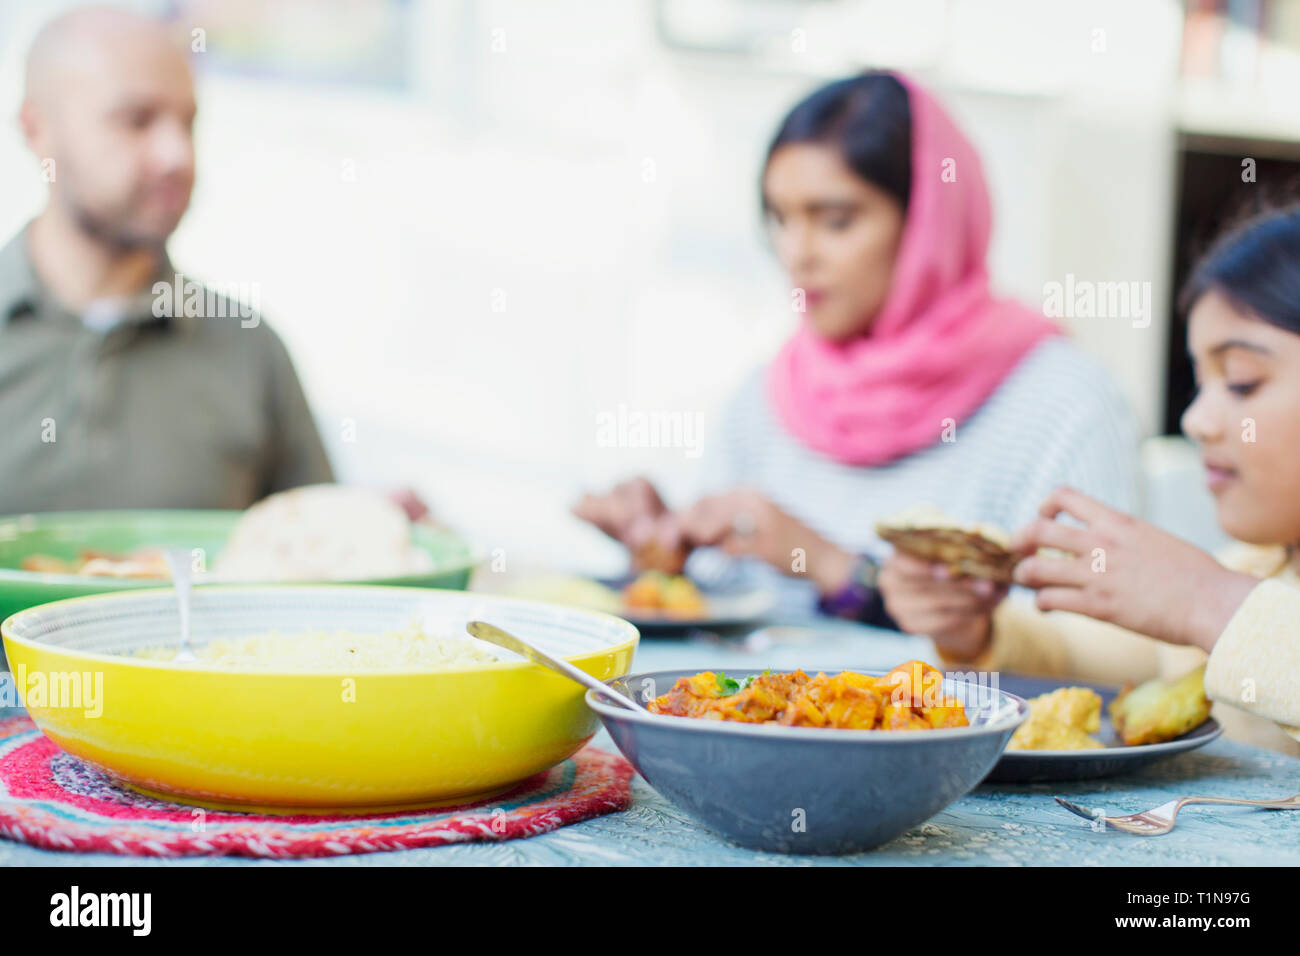 Family eating dinner at table Stock Photo